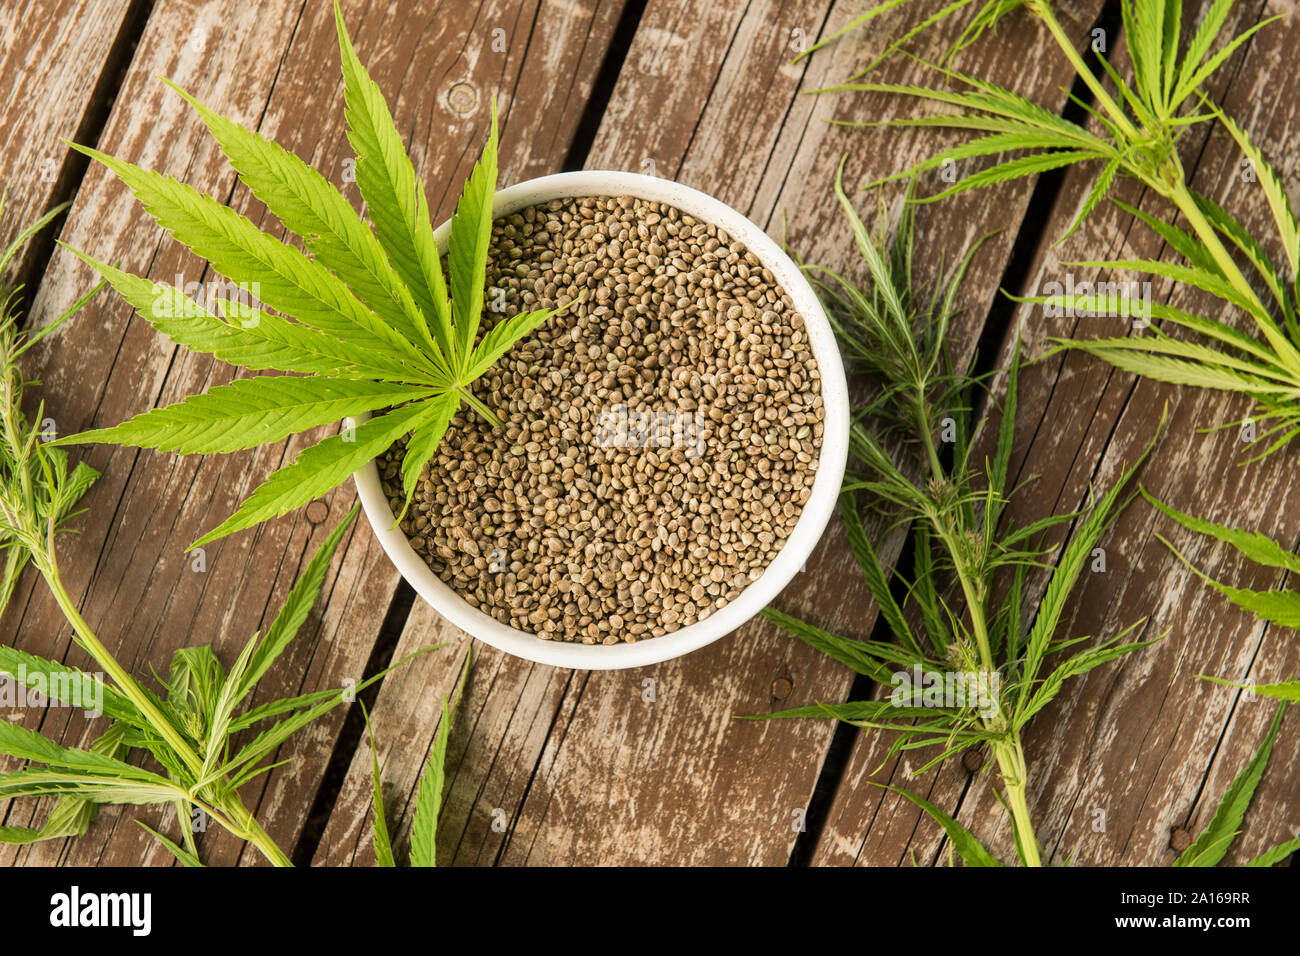 Hemp leaves and seeds from above on wooden background Stock Photo